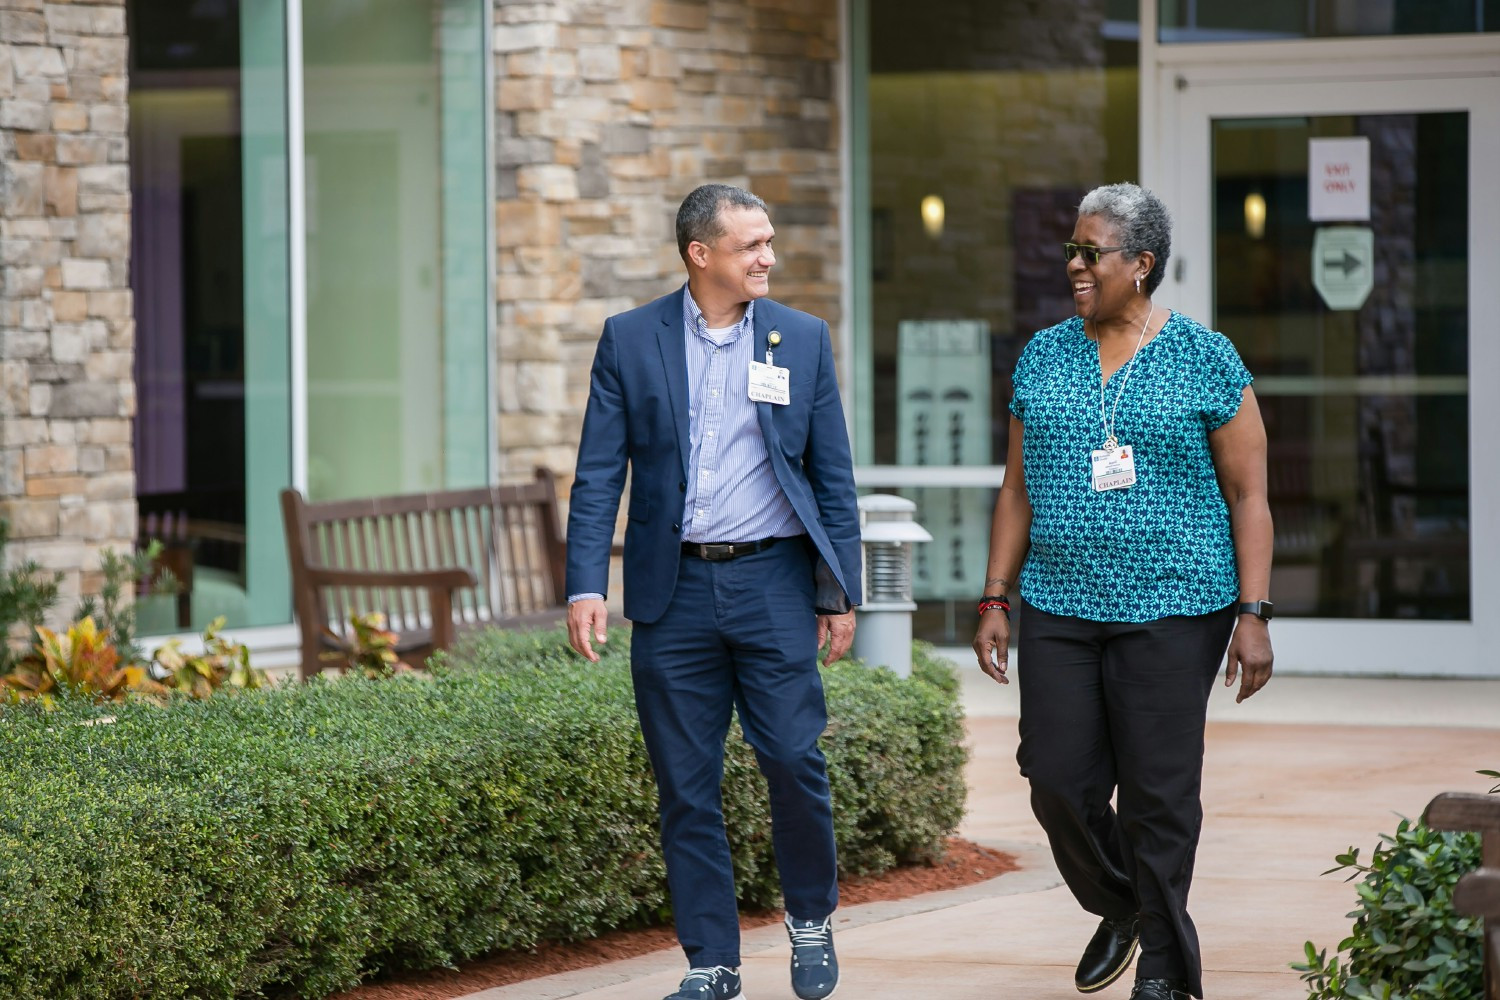 Baptist Health is committed to caring for people as a whole- spiritually, culturally, emotionally and socially.